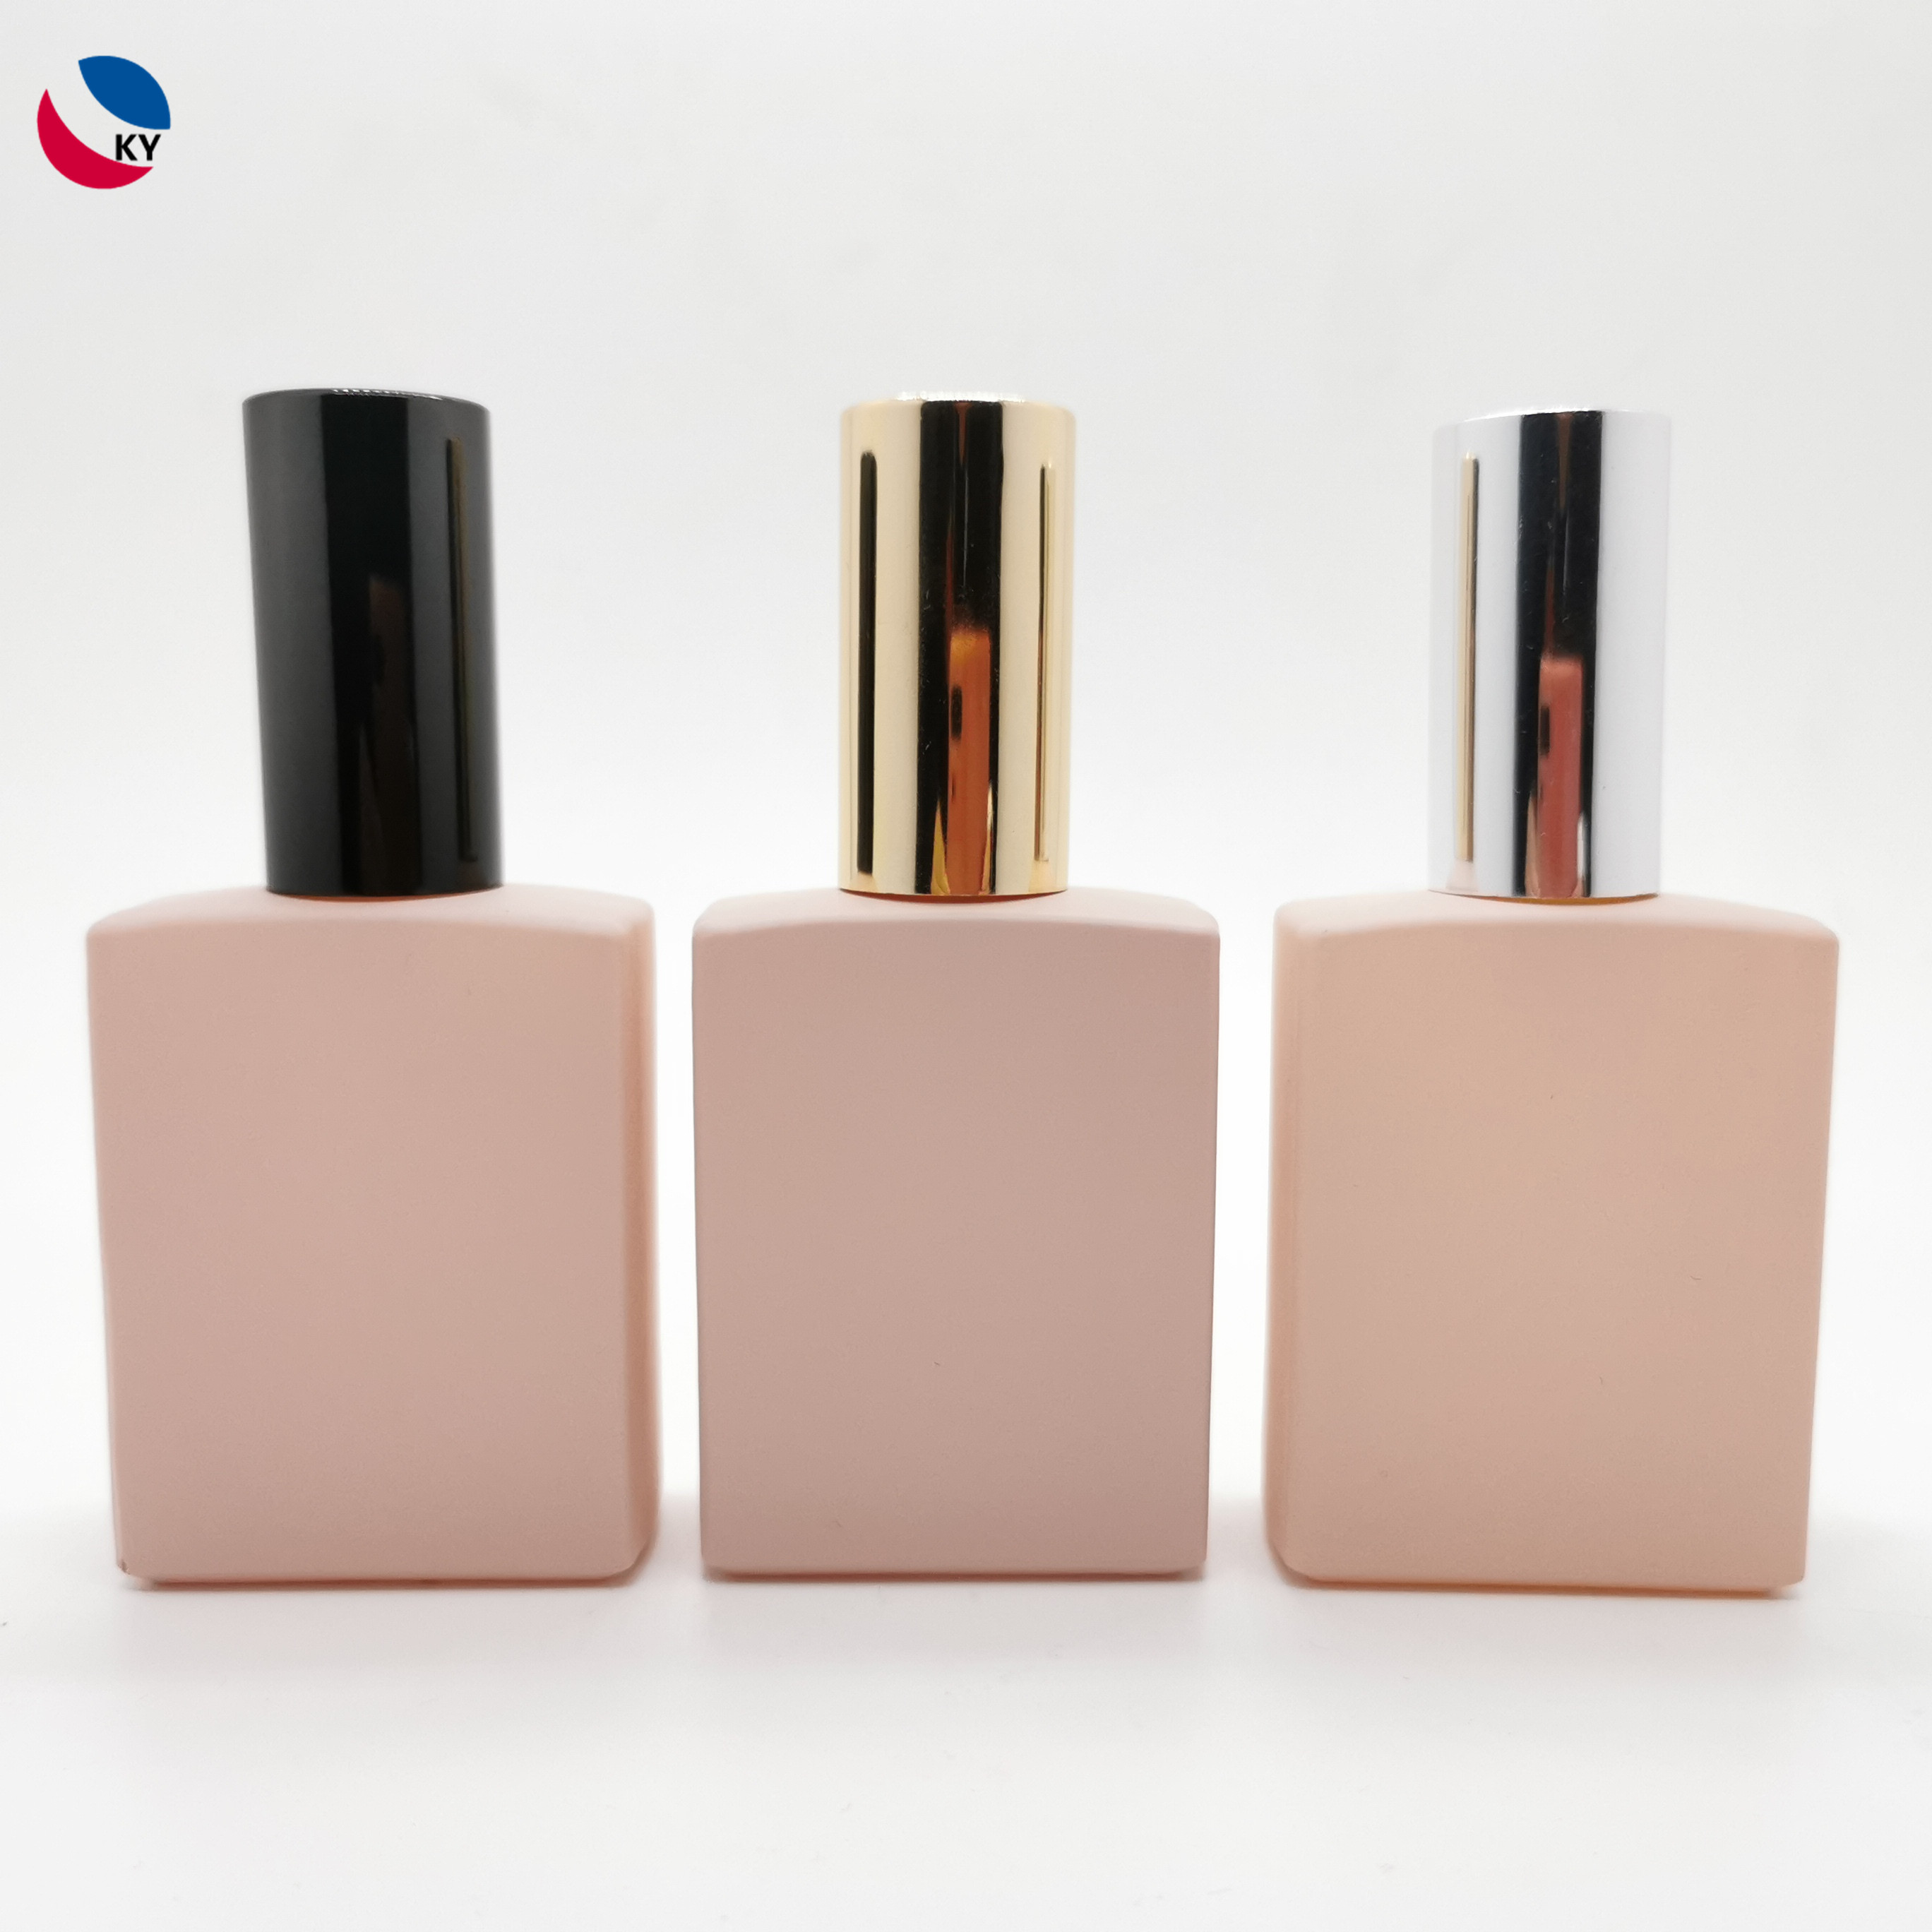 Frosted Matte Pink Perfume Bottles with Lid Selling Refillable Rectangular Empty 50ml Glass PUMP Sprayer Screen Printing Personal Care